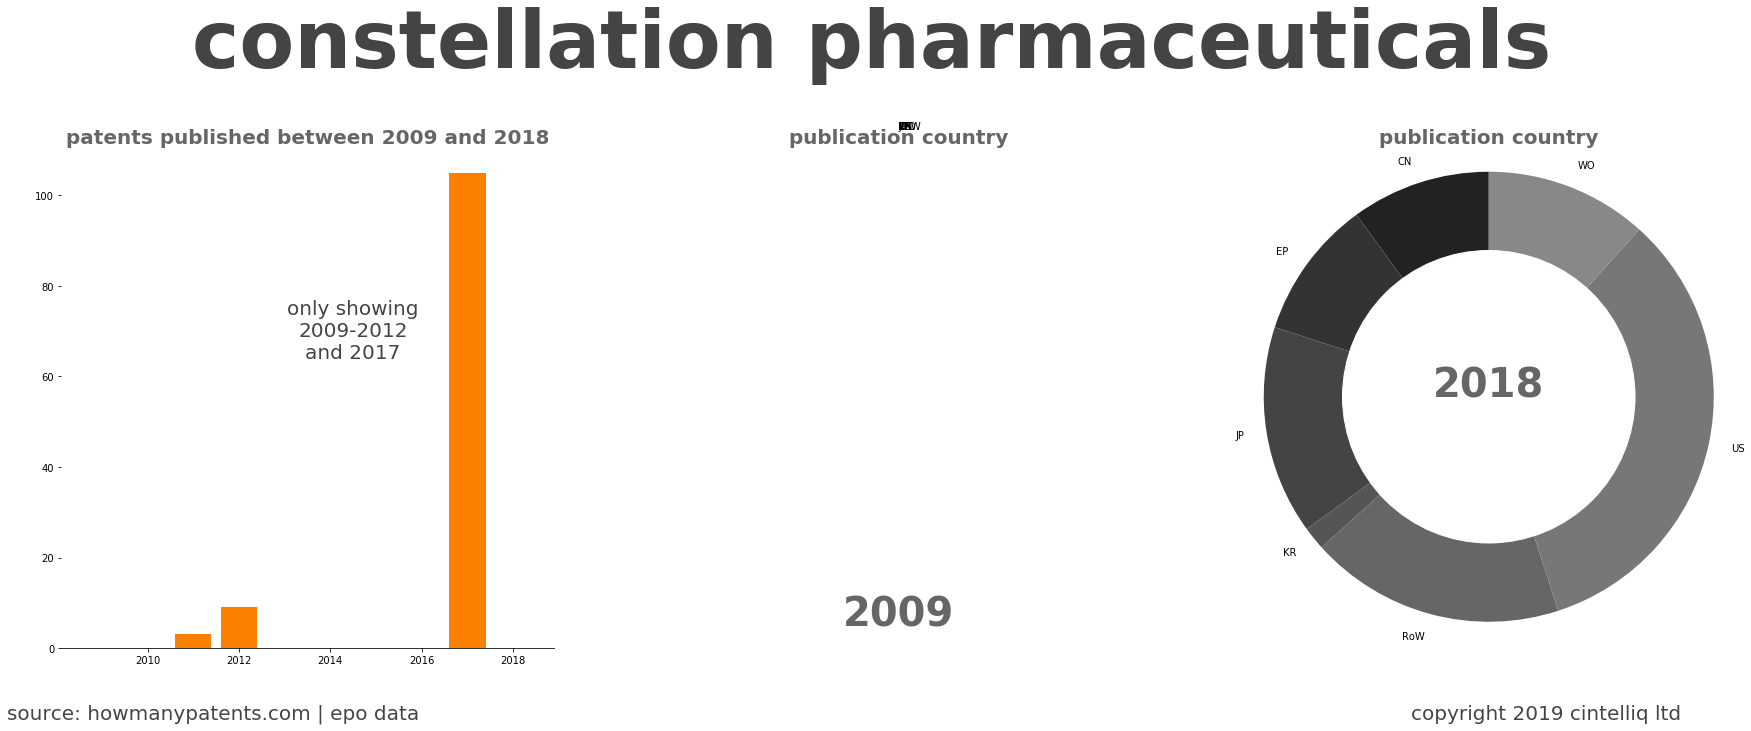 summary of patents for Constellation Pharmaceuticals